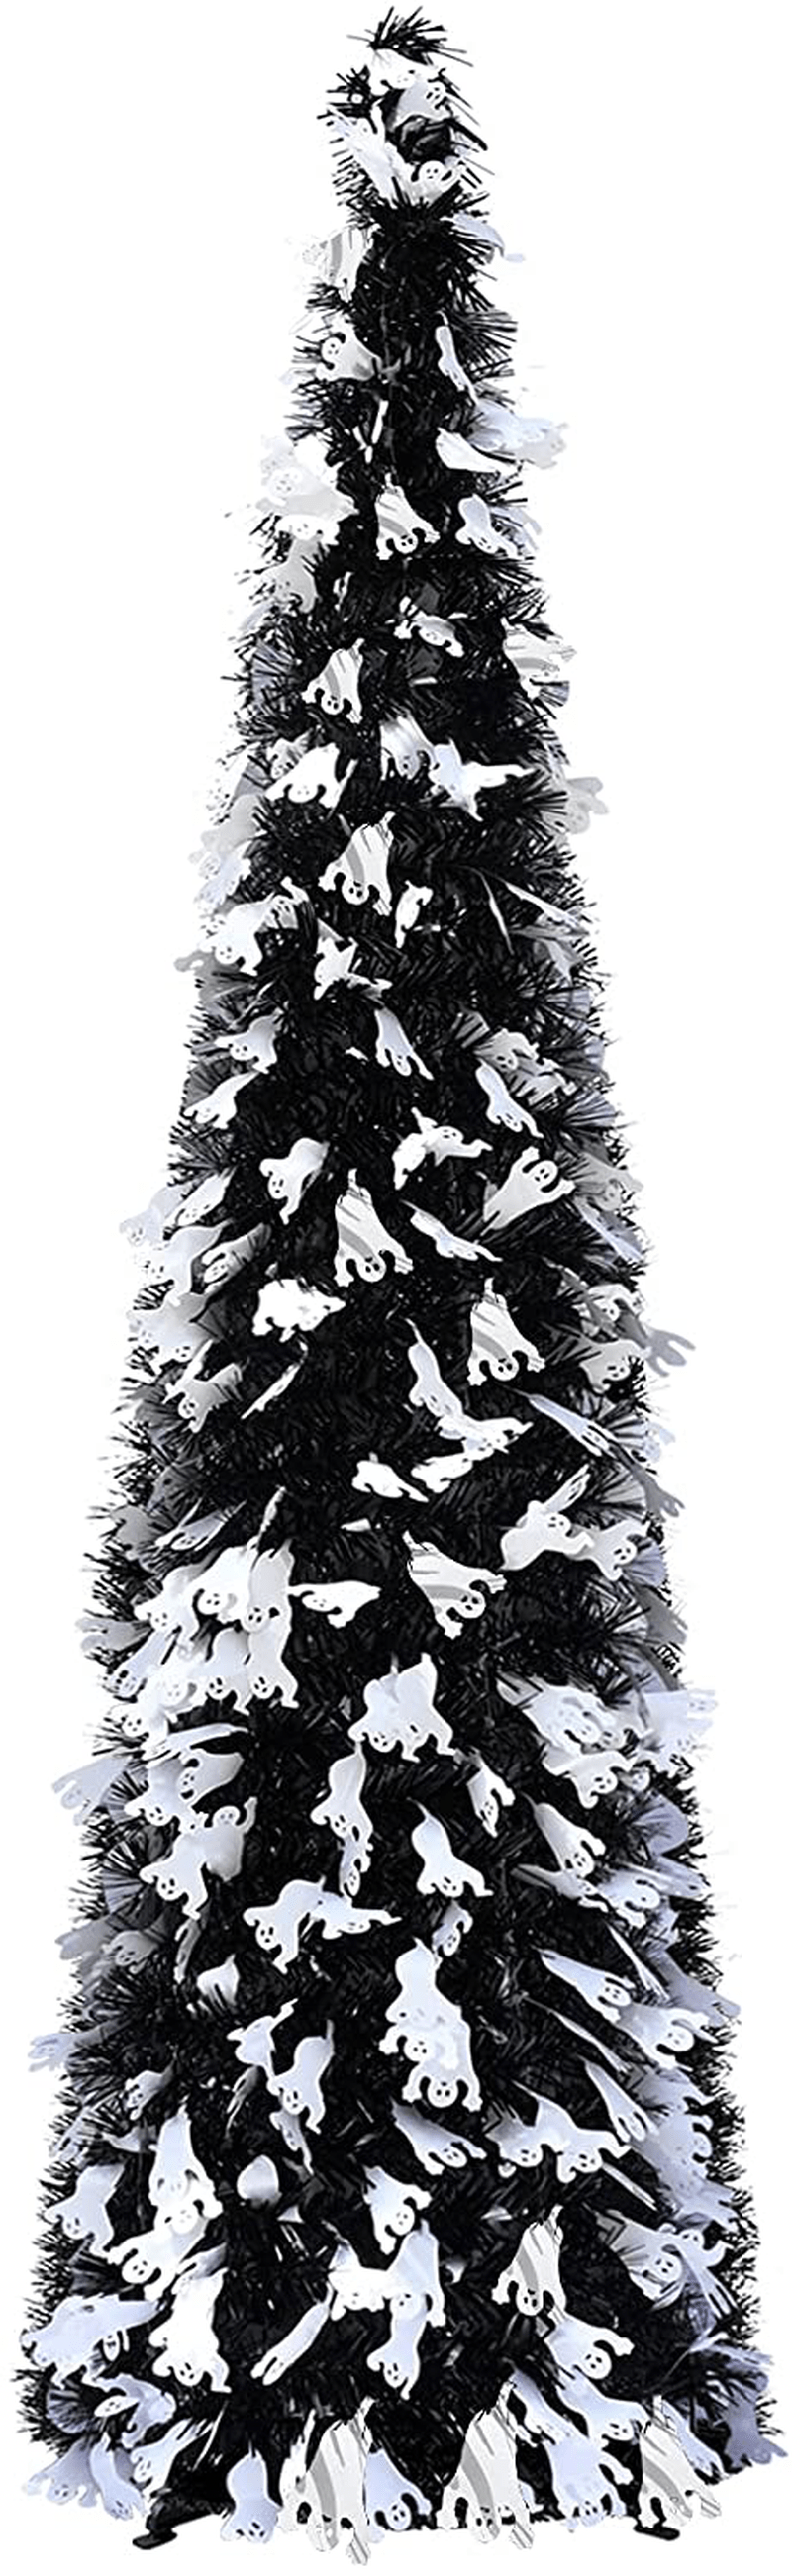 5' Pop Up Halloween Christmas Thin Tree Collapsible with Easy-Assembly Stand for Xmas Halloween Holiday Home, Office, Classroom Party Display. Black Tinsel Trees with Ghost Sequins